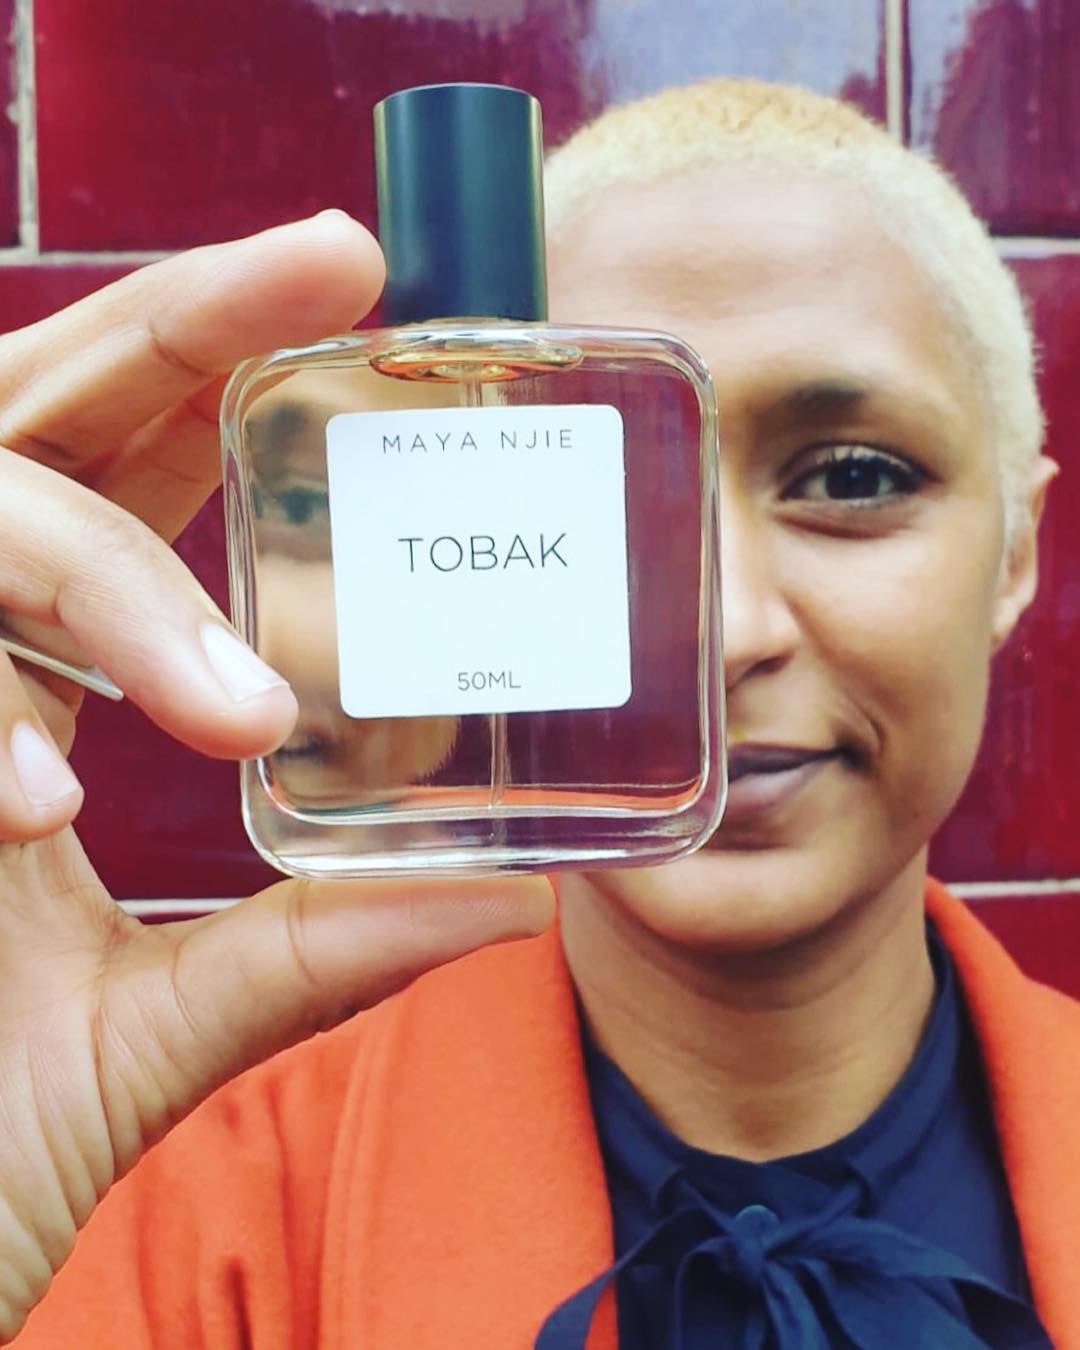 The niche perfumer creating scents from her Swedish-Gambian upbringing